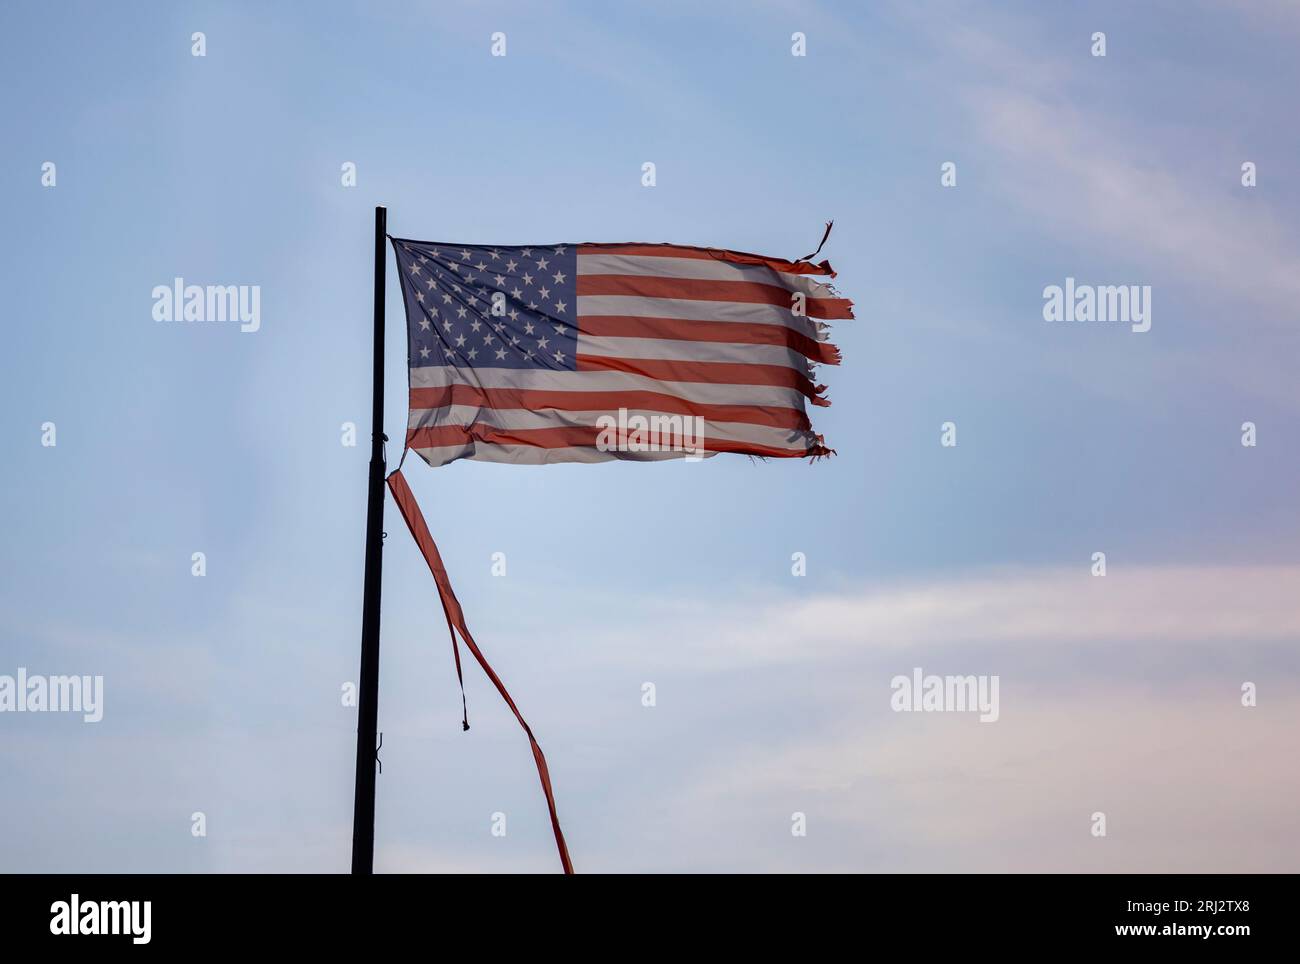 A Weathered and Torn American Flag blowing in the wind Stock Photo